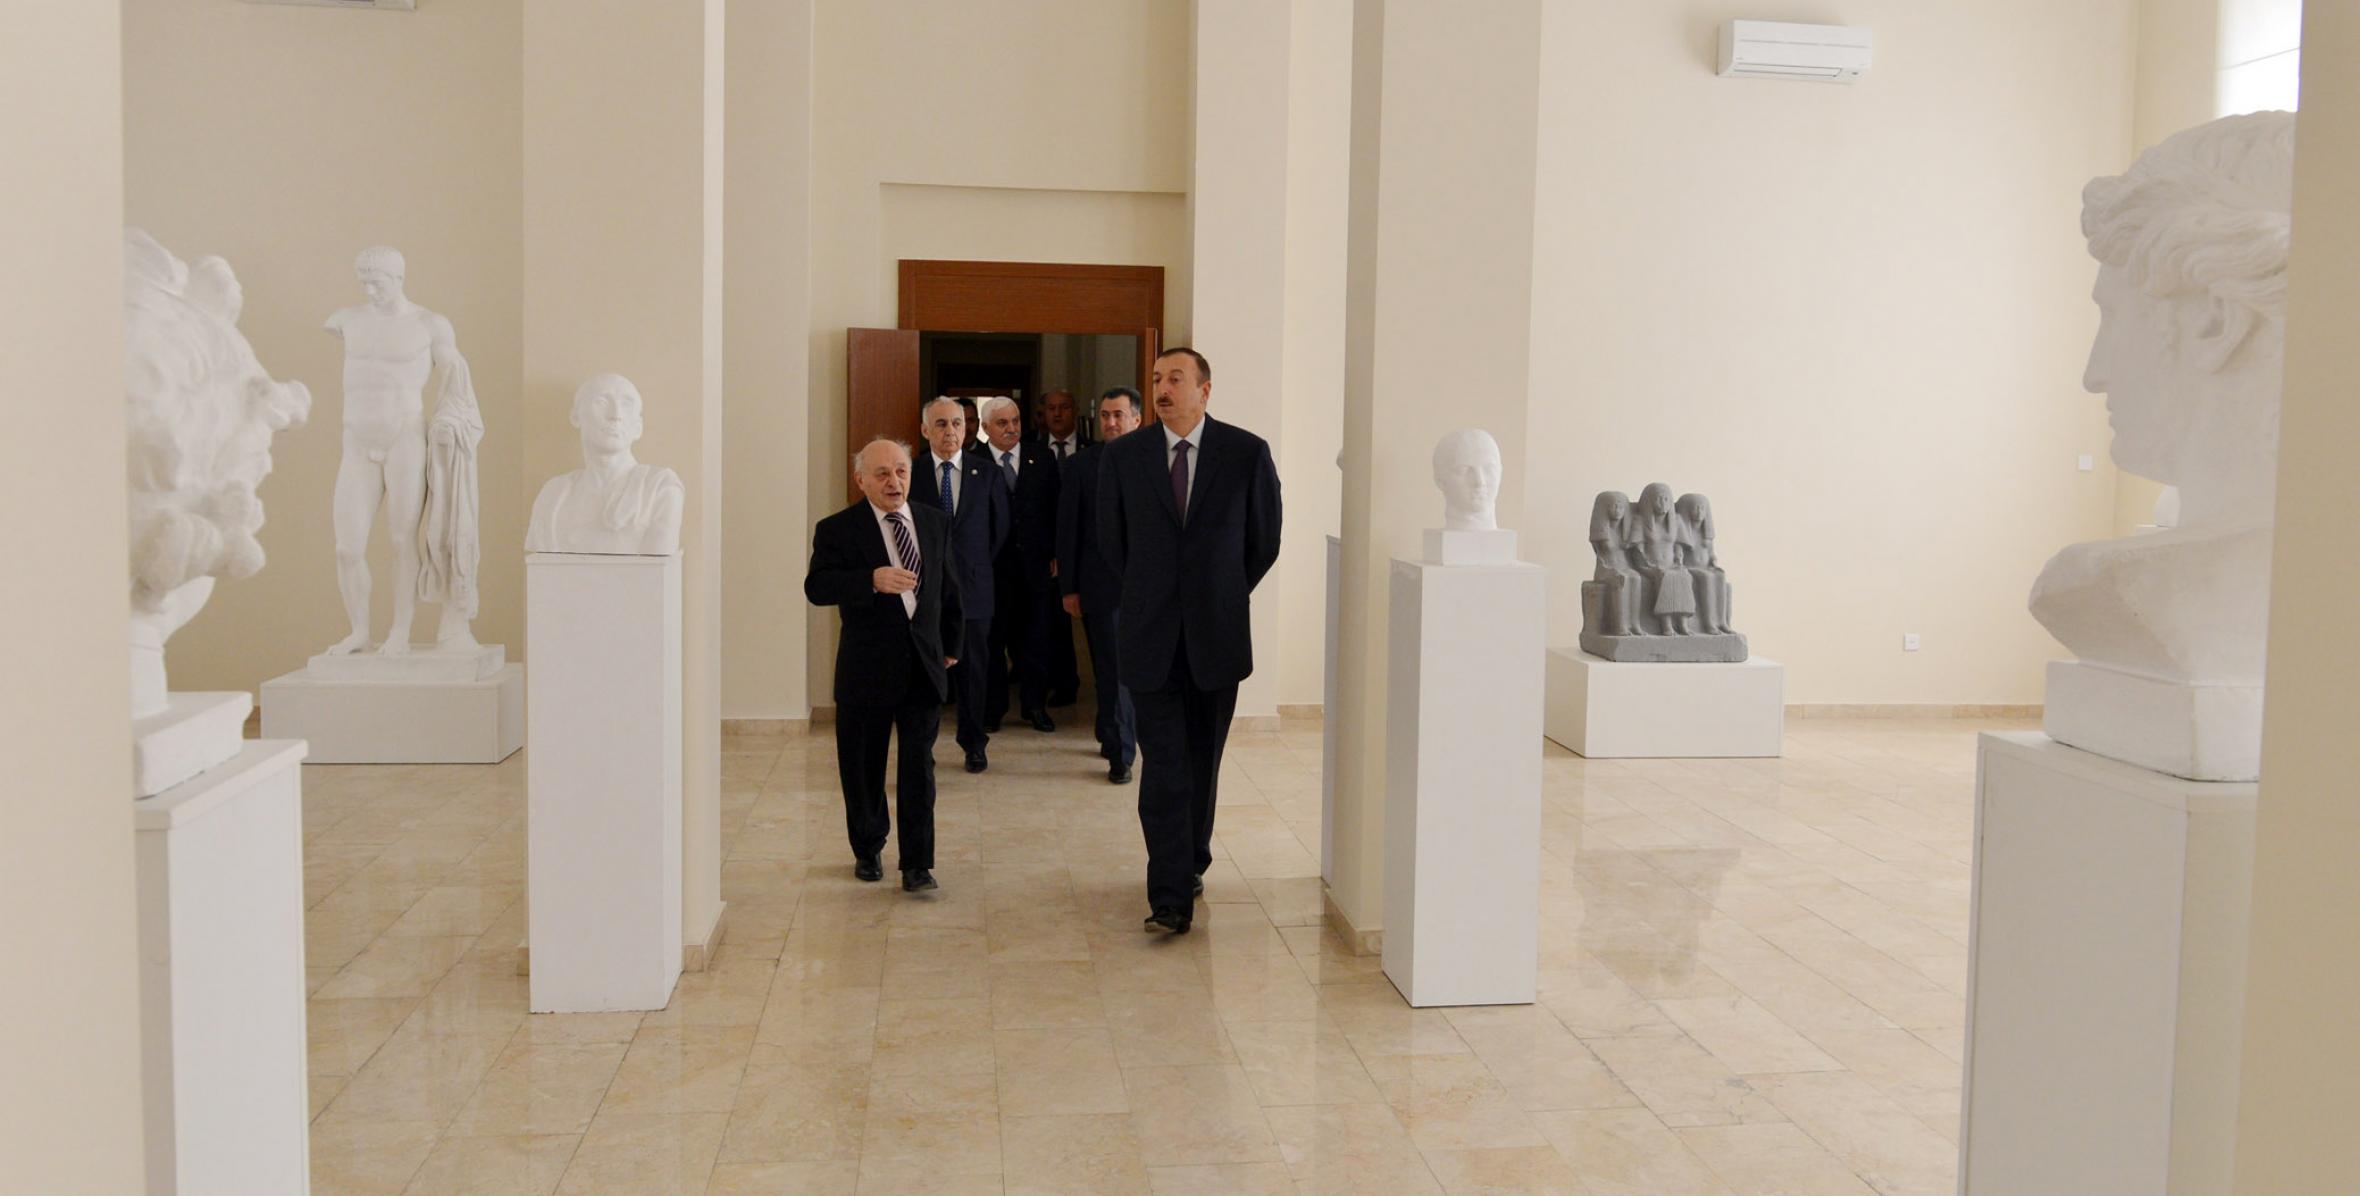 Ilham Aliyev reviewed the newly commissioned building of the Azerbaijan State Academy of Fine Arts